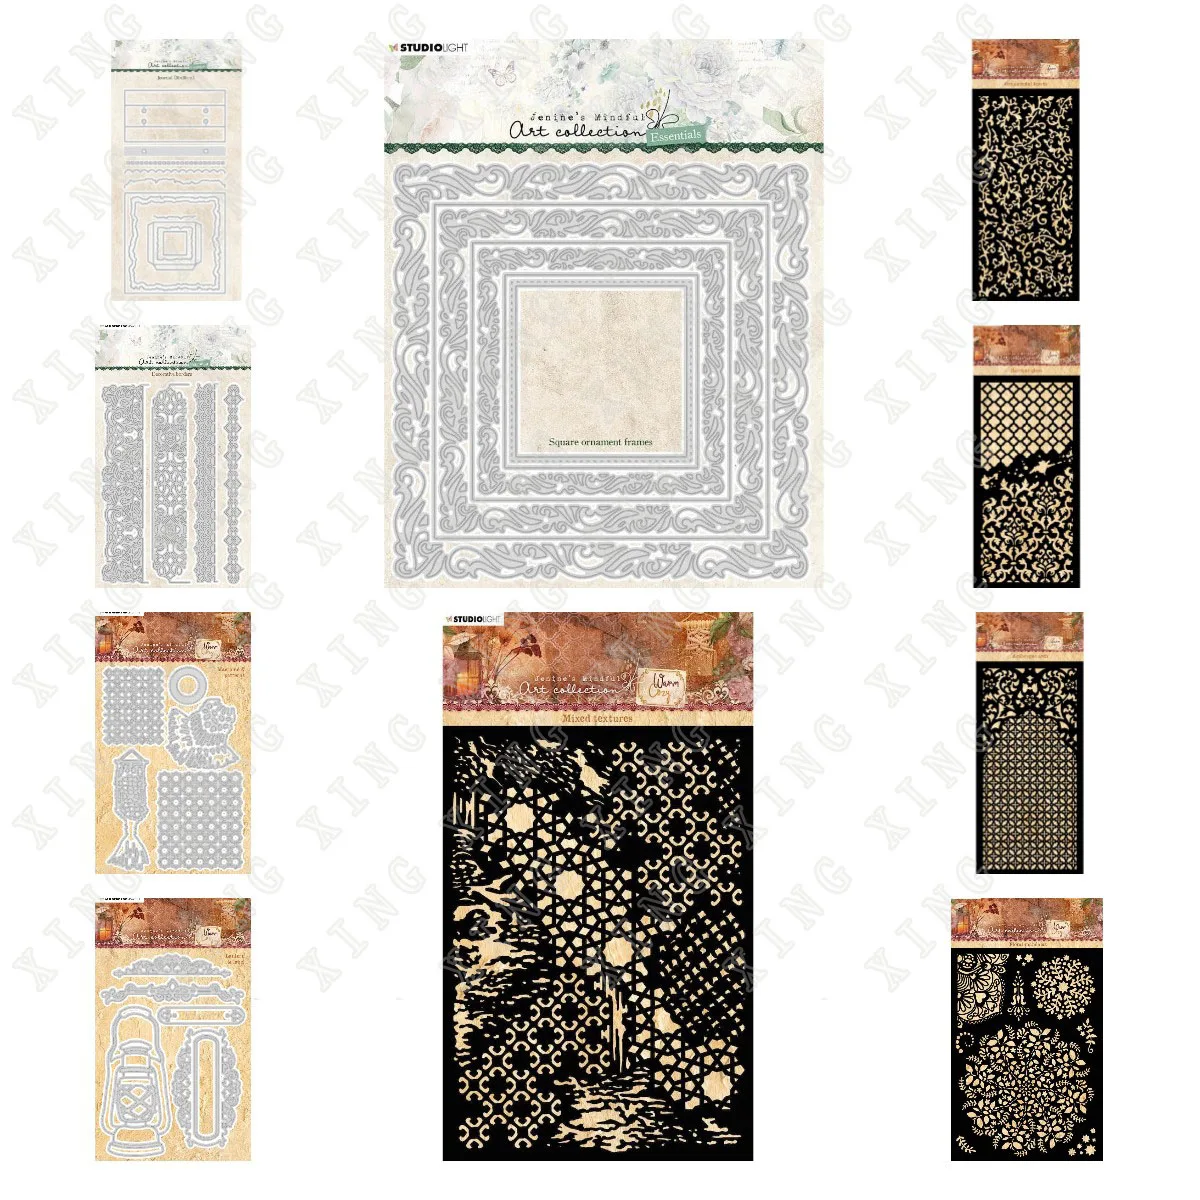 

Jma Journal Square Lantern Patterns Floral Leaves Glass New Metal Cutting Dies Stencils Scrapbooking Diary Embossing Paper Cards